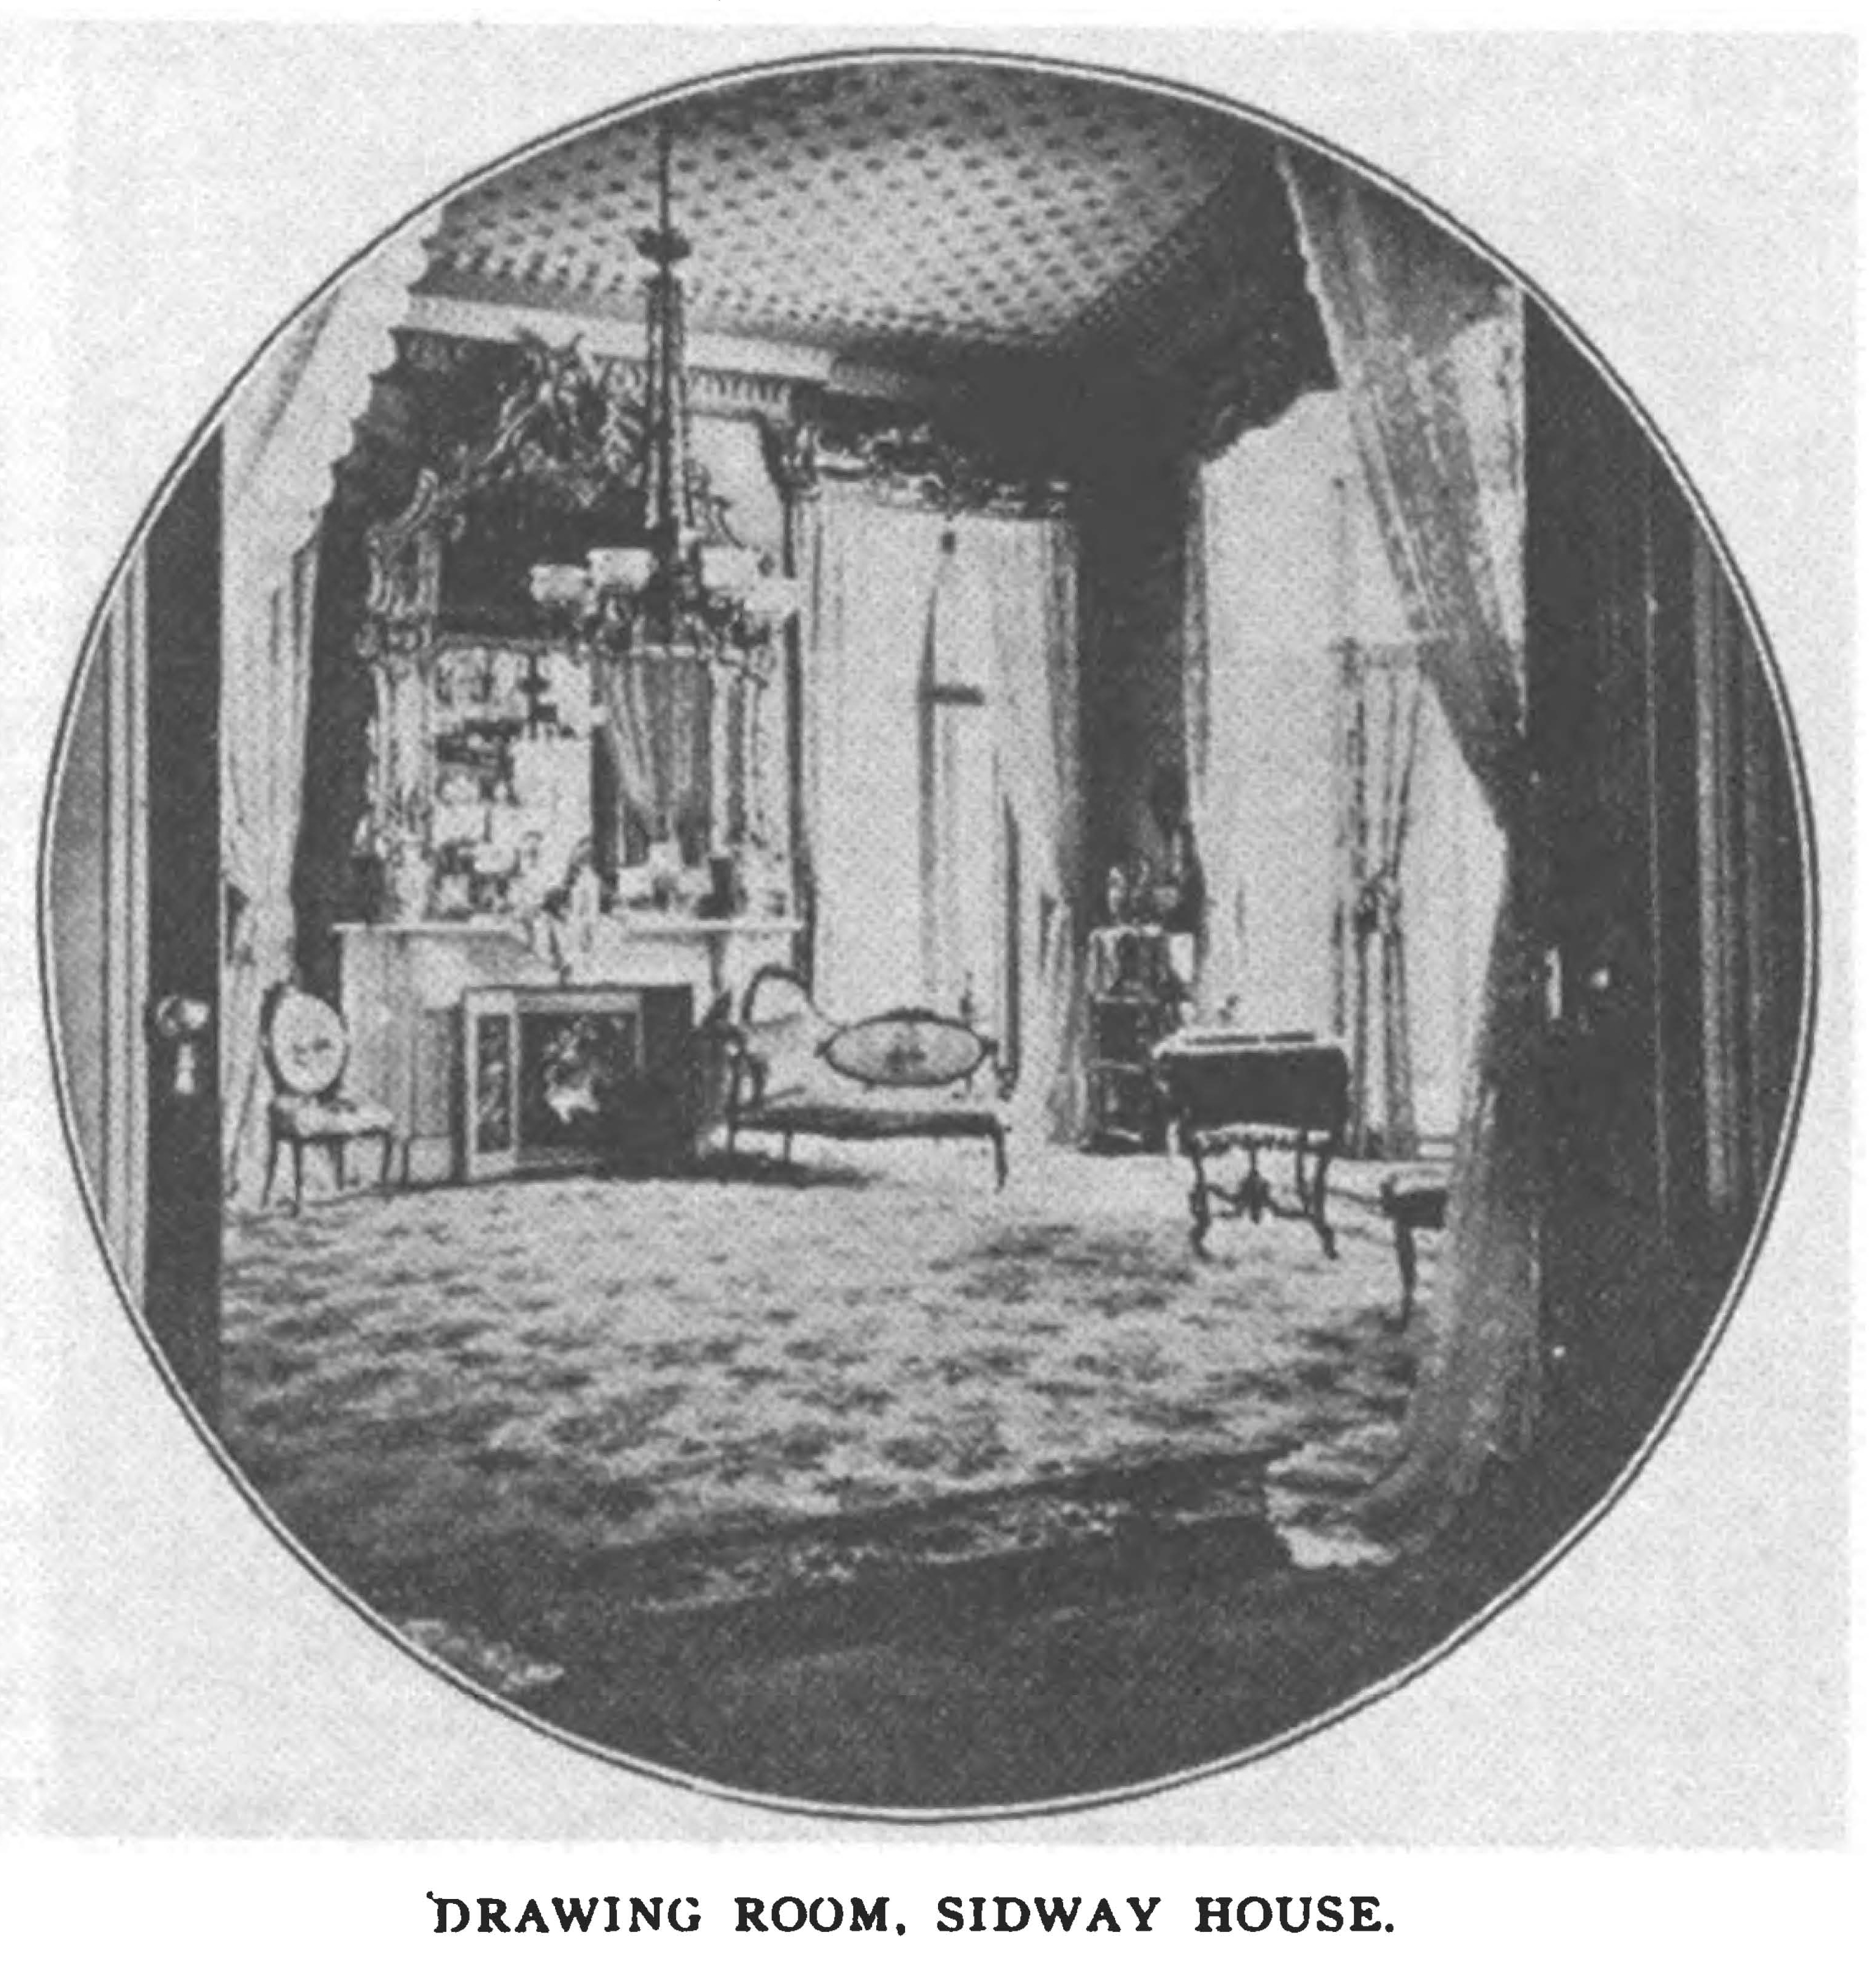 drawing room sidway house picture book of earlier buffalo